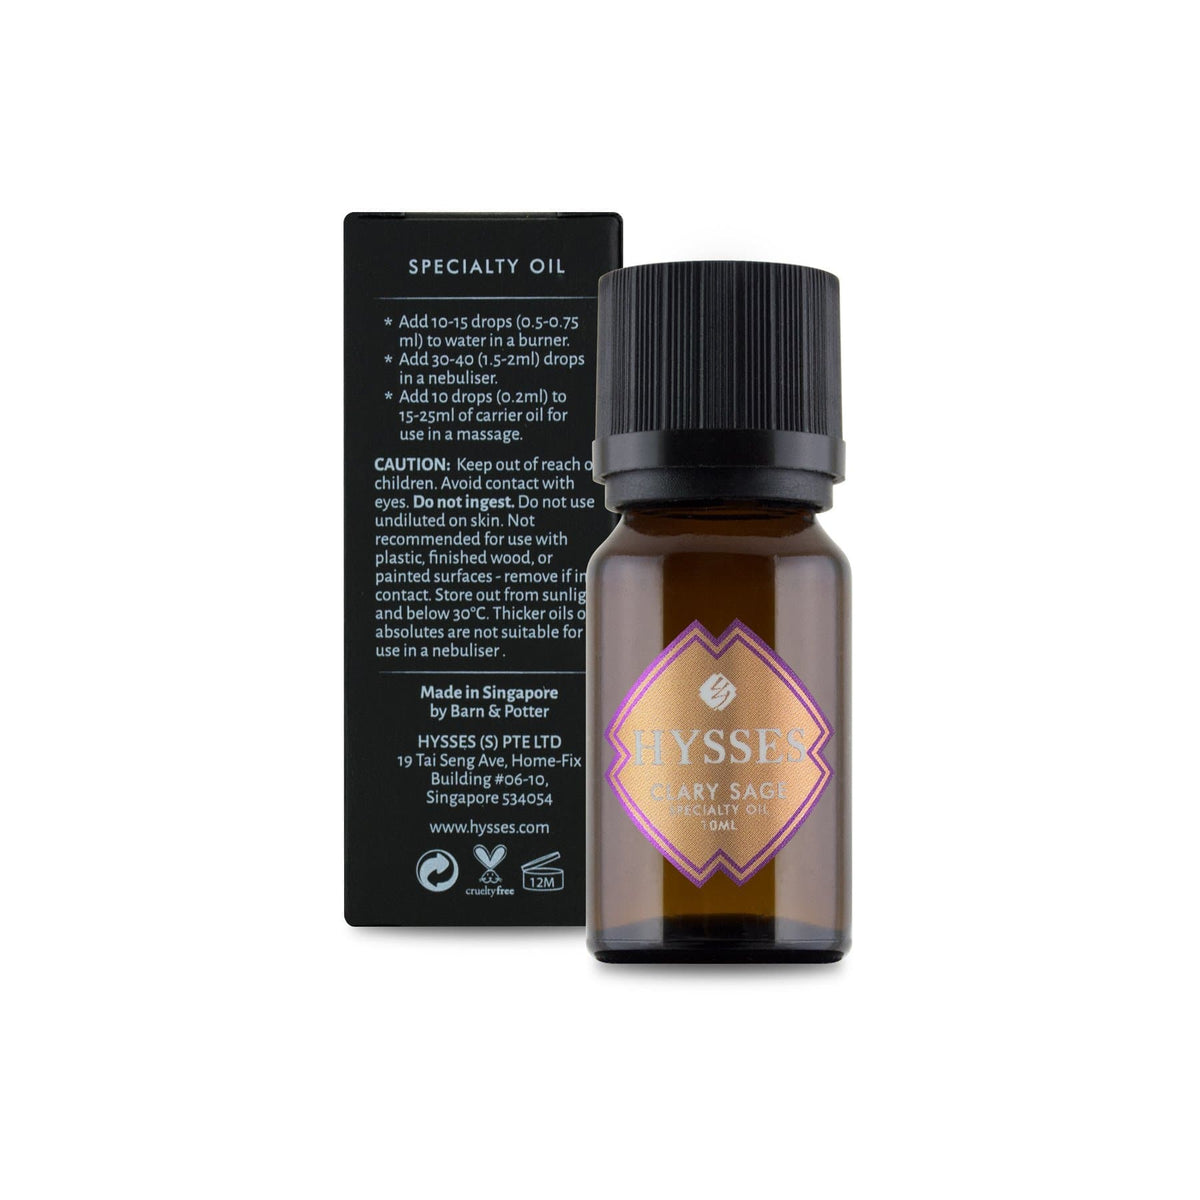 Hysses Essential Oil Specialty Oil Clary Sage